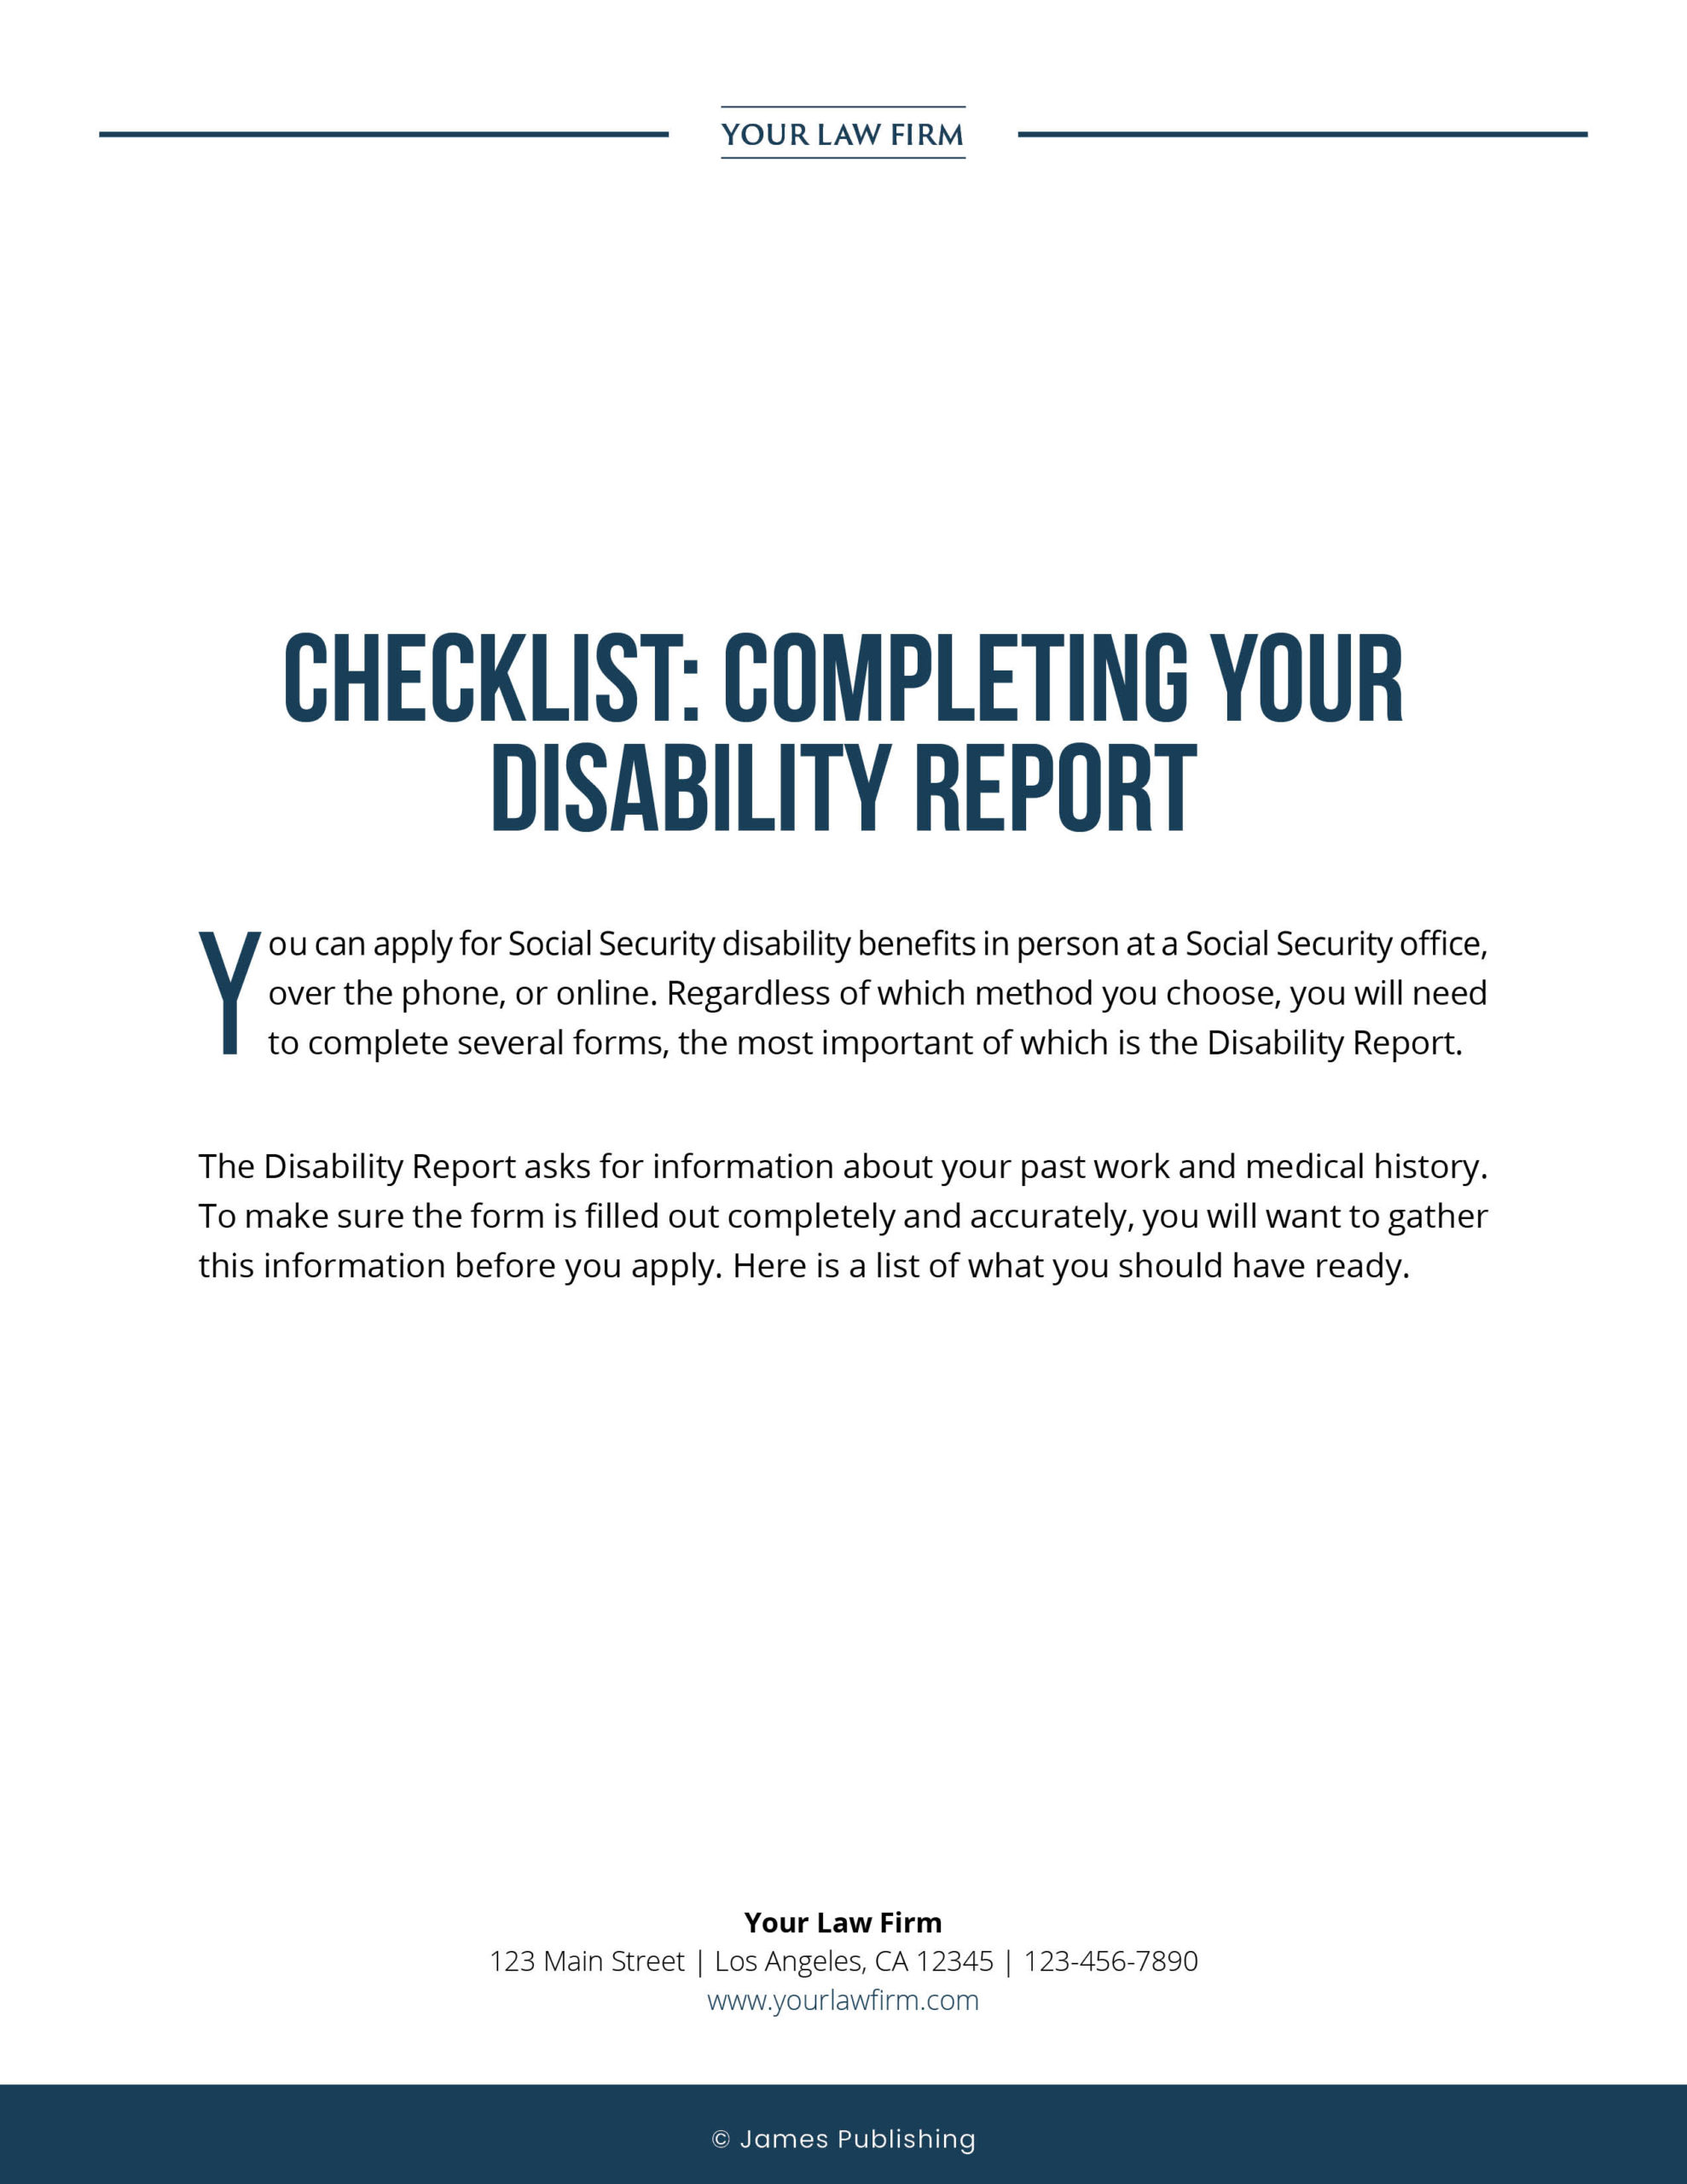 SSD-05 Checklist for Completing Your Disability Report